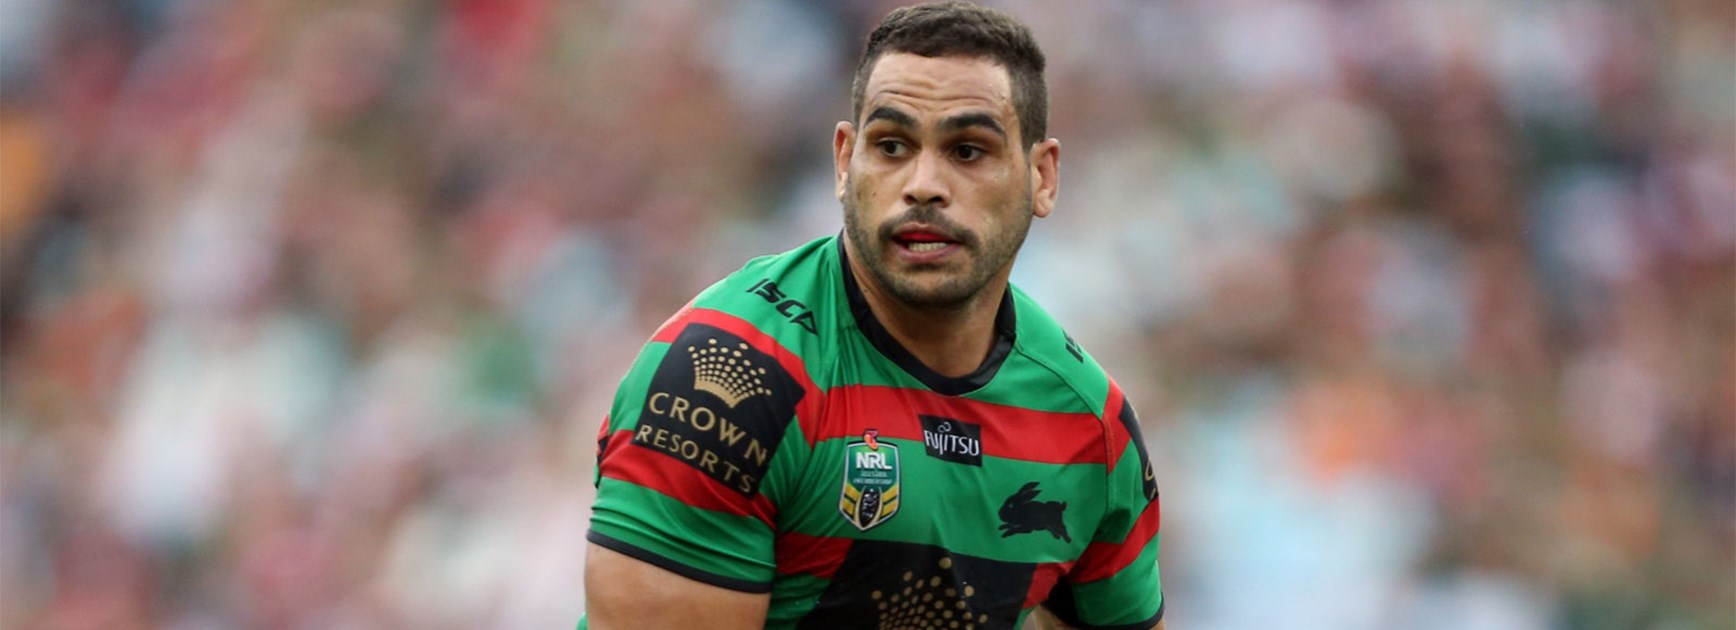 Souths coach Michael Maguire could shift Greg Inglis to five-eighth following the long term injury to Adam Reynolds.